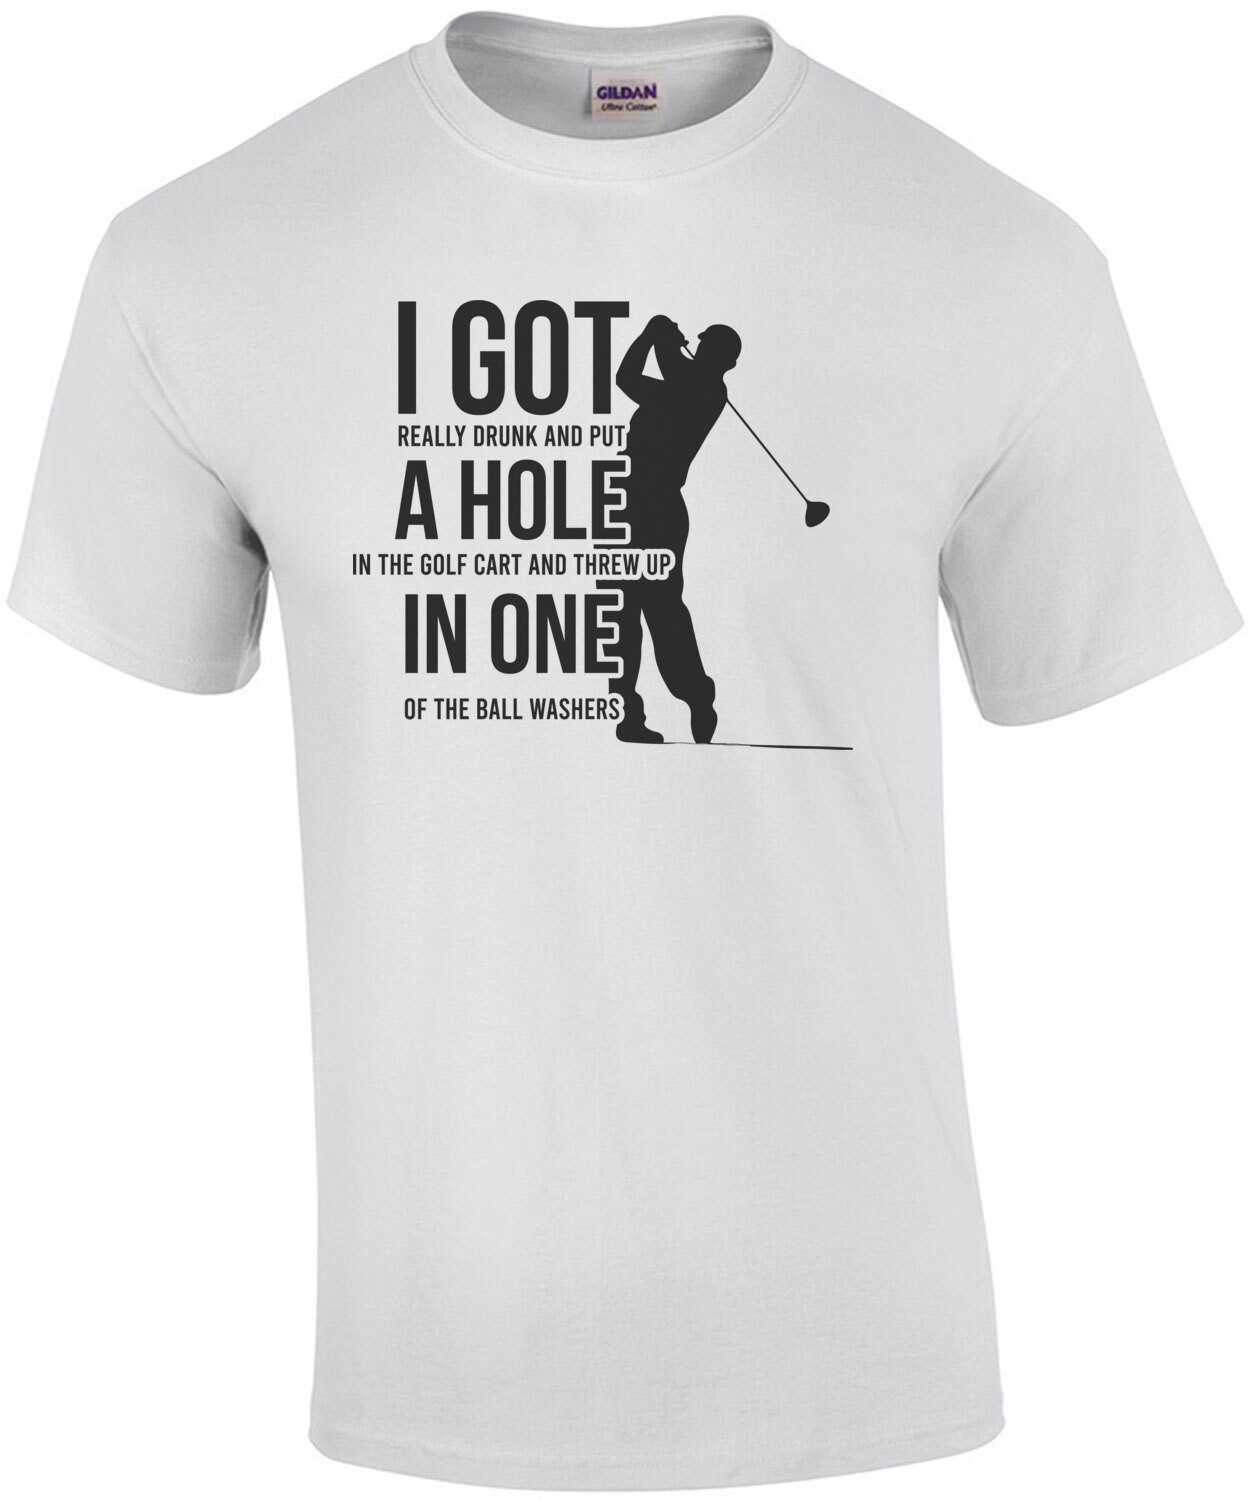 I got really drunk and put a hole in the golf cart and threw up in one of the ball washers - funny golf t-shirt